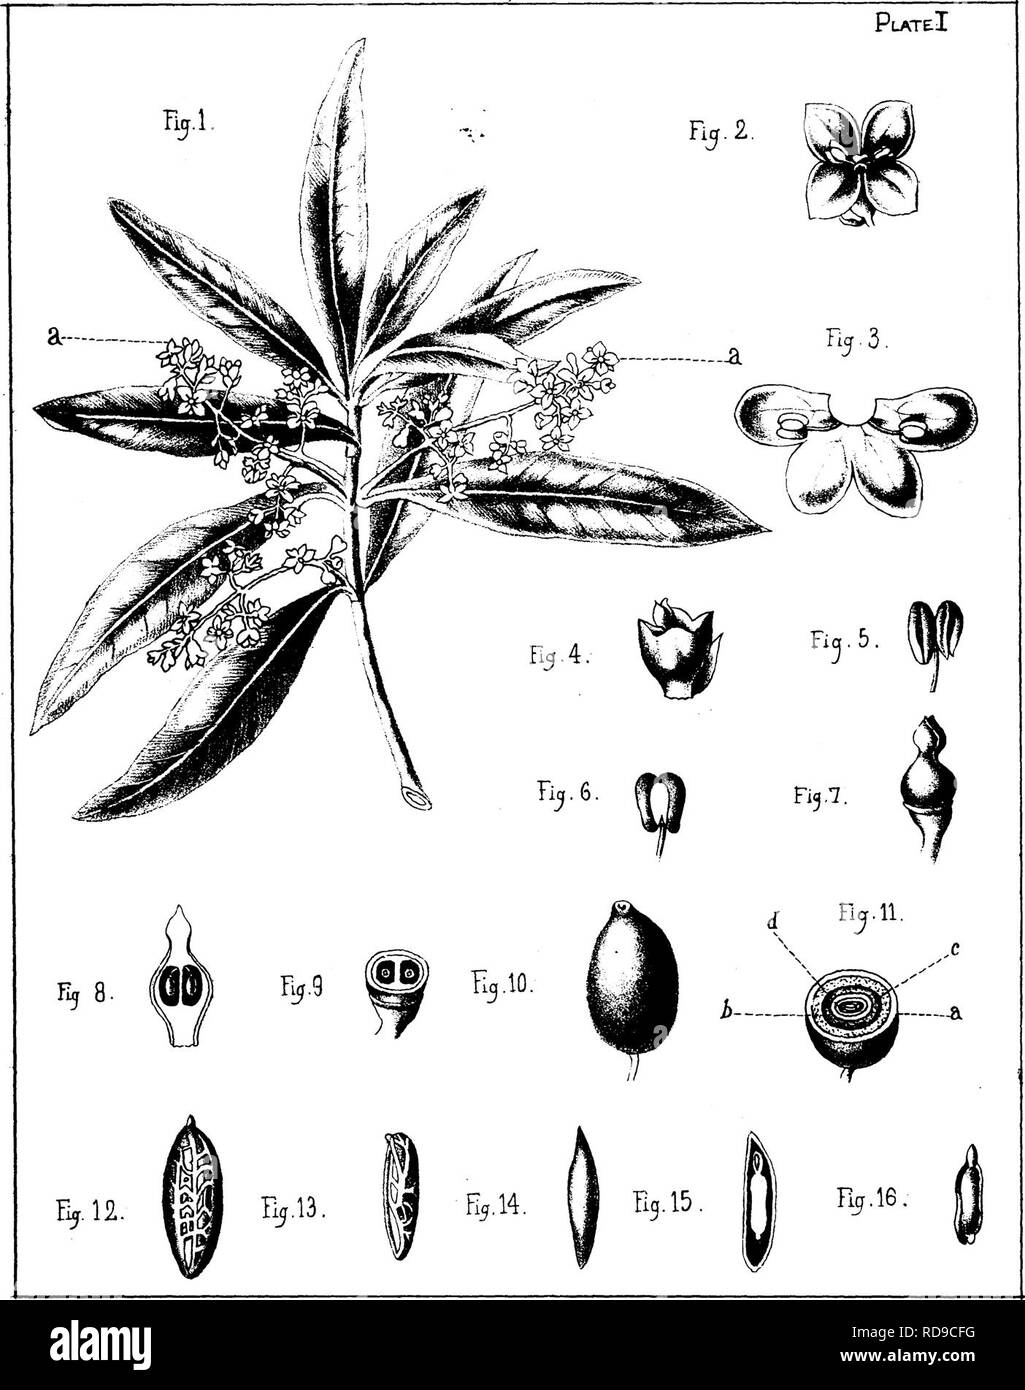 . The olive : its culture in theory and practice. Olive. THE REPRODUCTIVE ORGANS OF THE OLIVE.. Pig. 1. A branch of the olive in flower, natural size, a a Blossom. Fig. 2. Inside view of flower, enlarged. Fig. 3. Corolla cut and spread out to show the in- sertion of the stamens. Fig. 4. Flower without the corolla, enlarged. Fig. 5. Front view of stamen, enlarged. Fig. 6. Rear view of stameh, enlarged. Fig. 7. Pistil, enlarged. Fig. 8. Pistil cut vertically. Fig. 9. The lower portion of bud cut horizon- tally, enlarge&lt;1. Fig. 10. The berry, natural size. Fig. 11. The berry cut horizontally.— Stock Photo